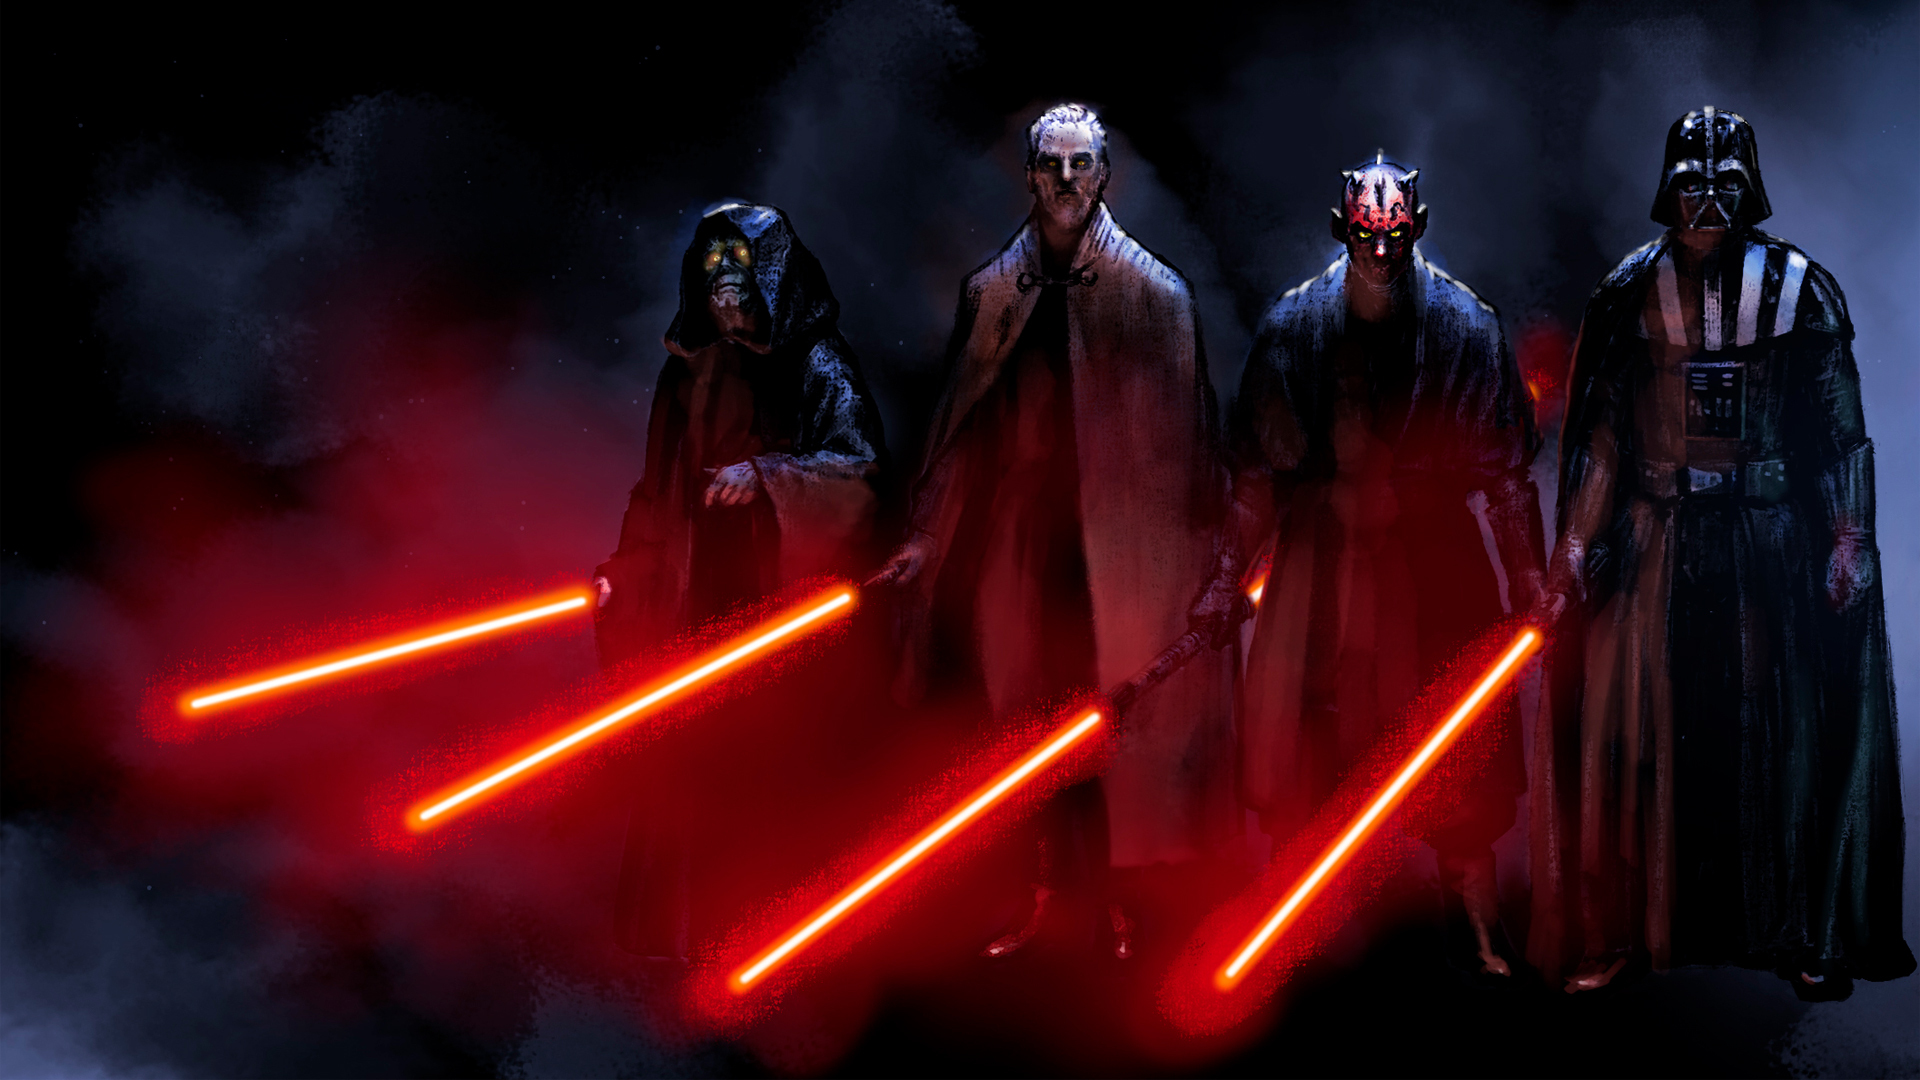 Sith Code Wallpaper Hd   Viewing Gallery